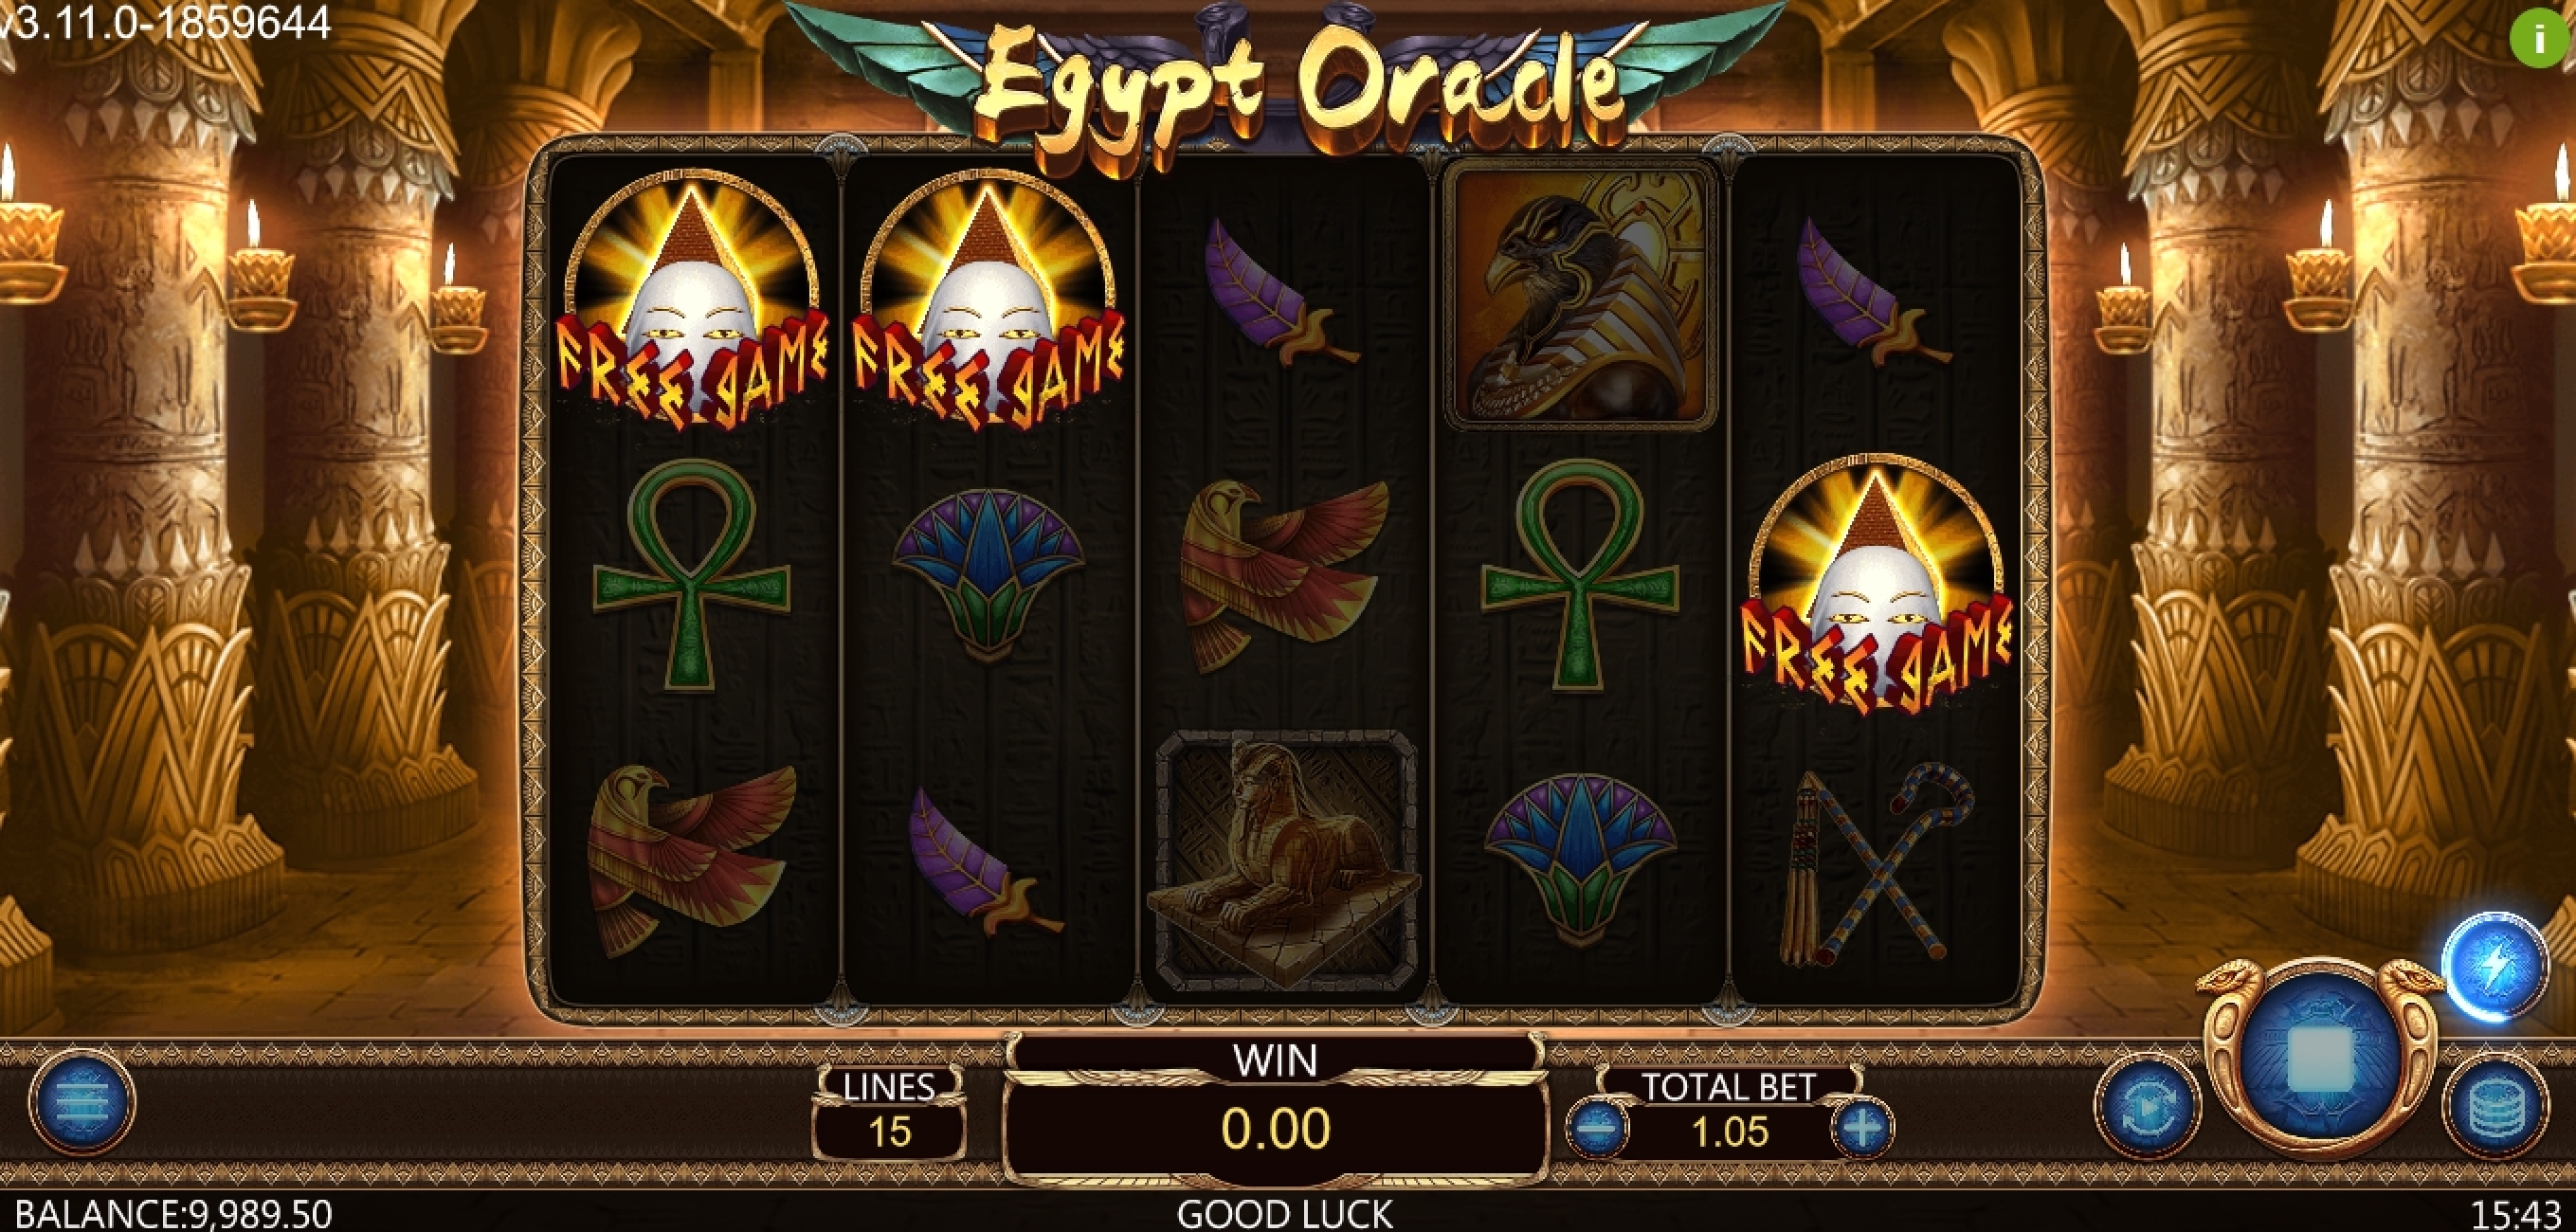 Win Money in Egypt Oracle Free Slot Game by Dragoon Soft